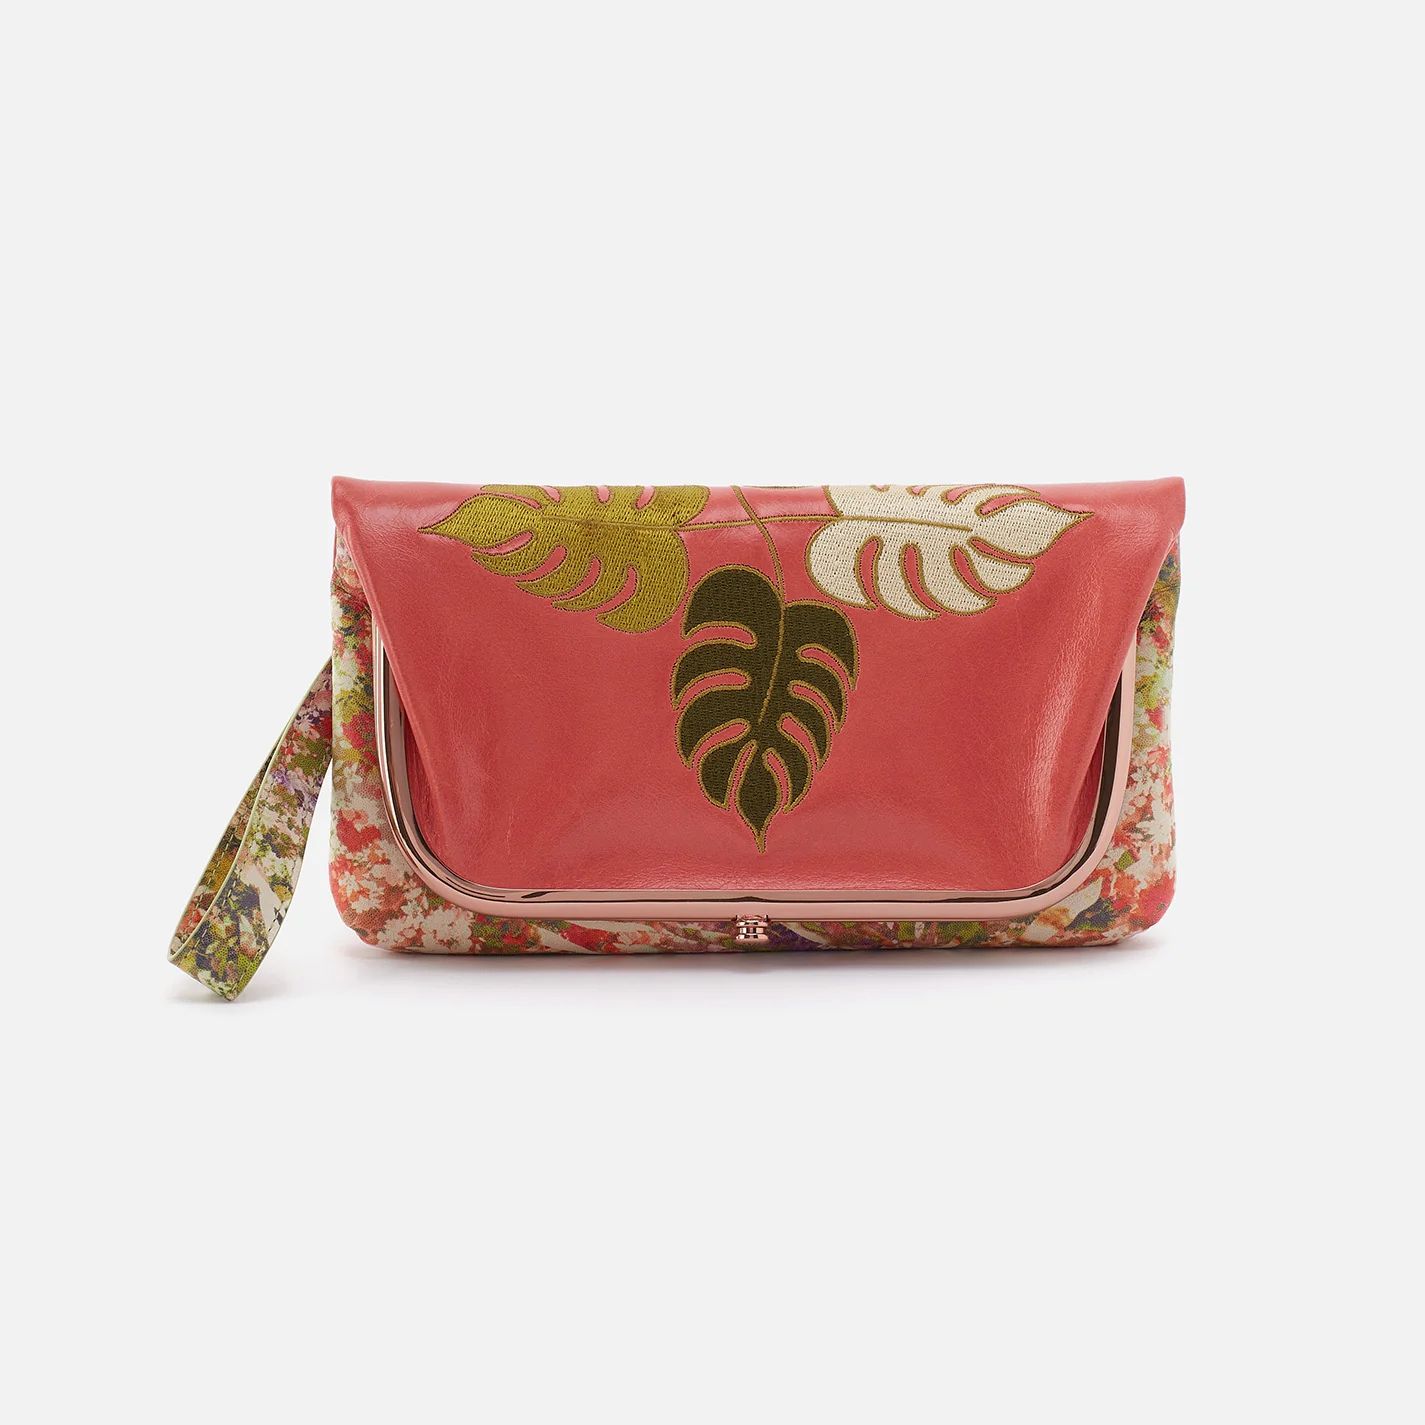 Lauren Wristlet in Mixed Leathers - Cherry Blossom | HOBO Bags